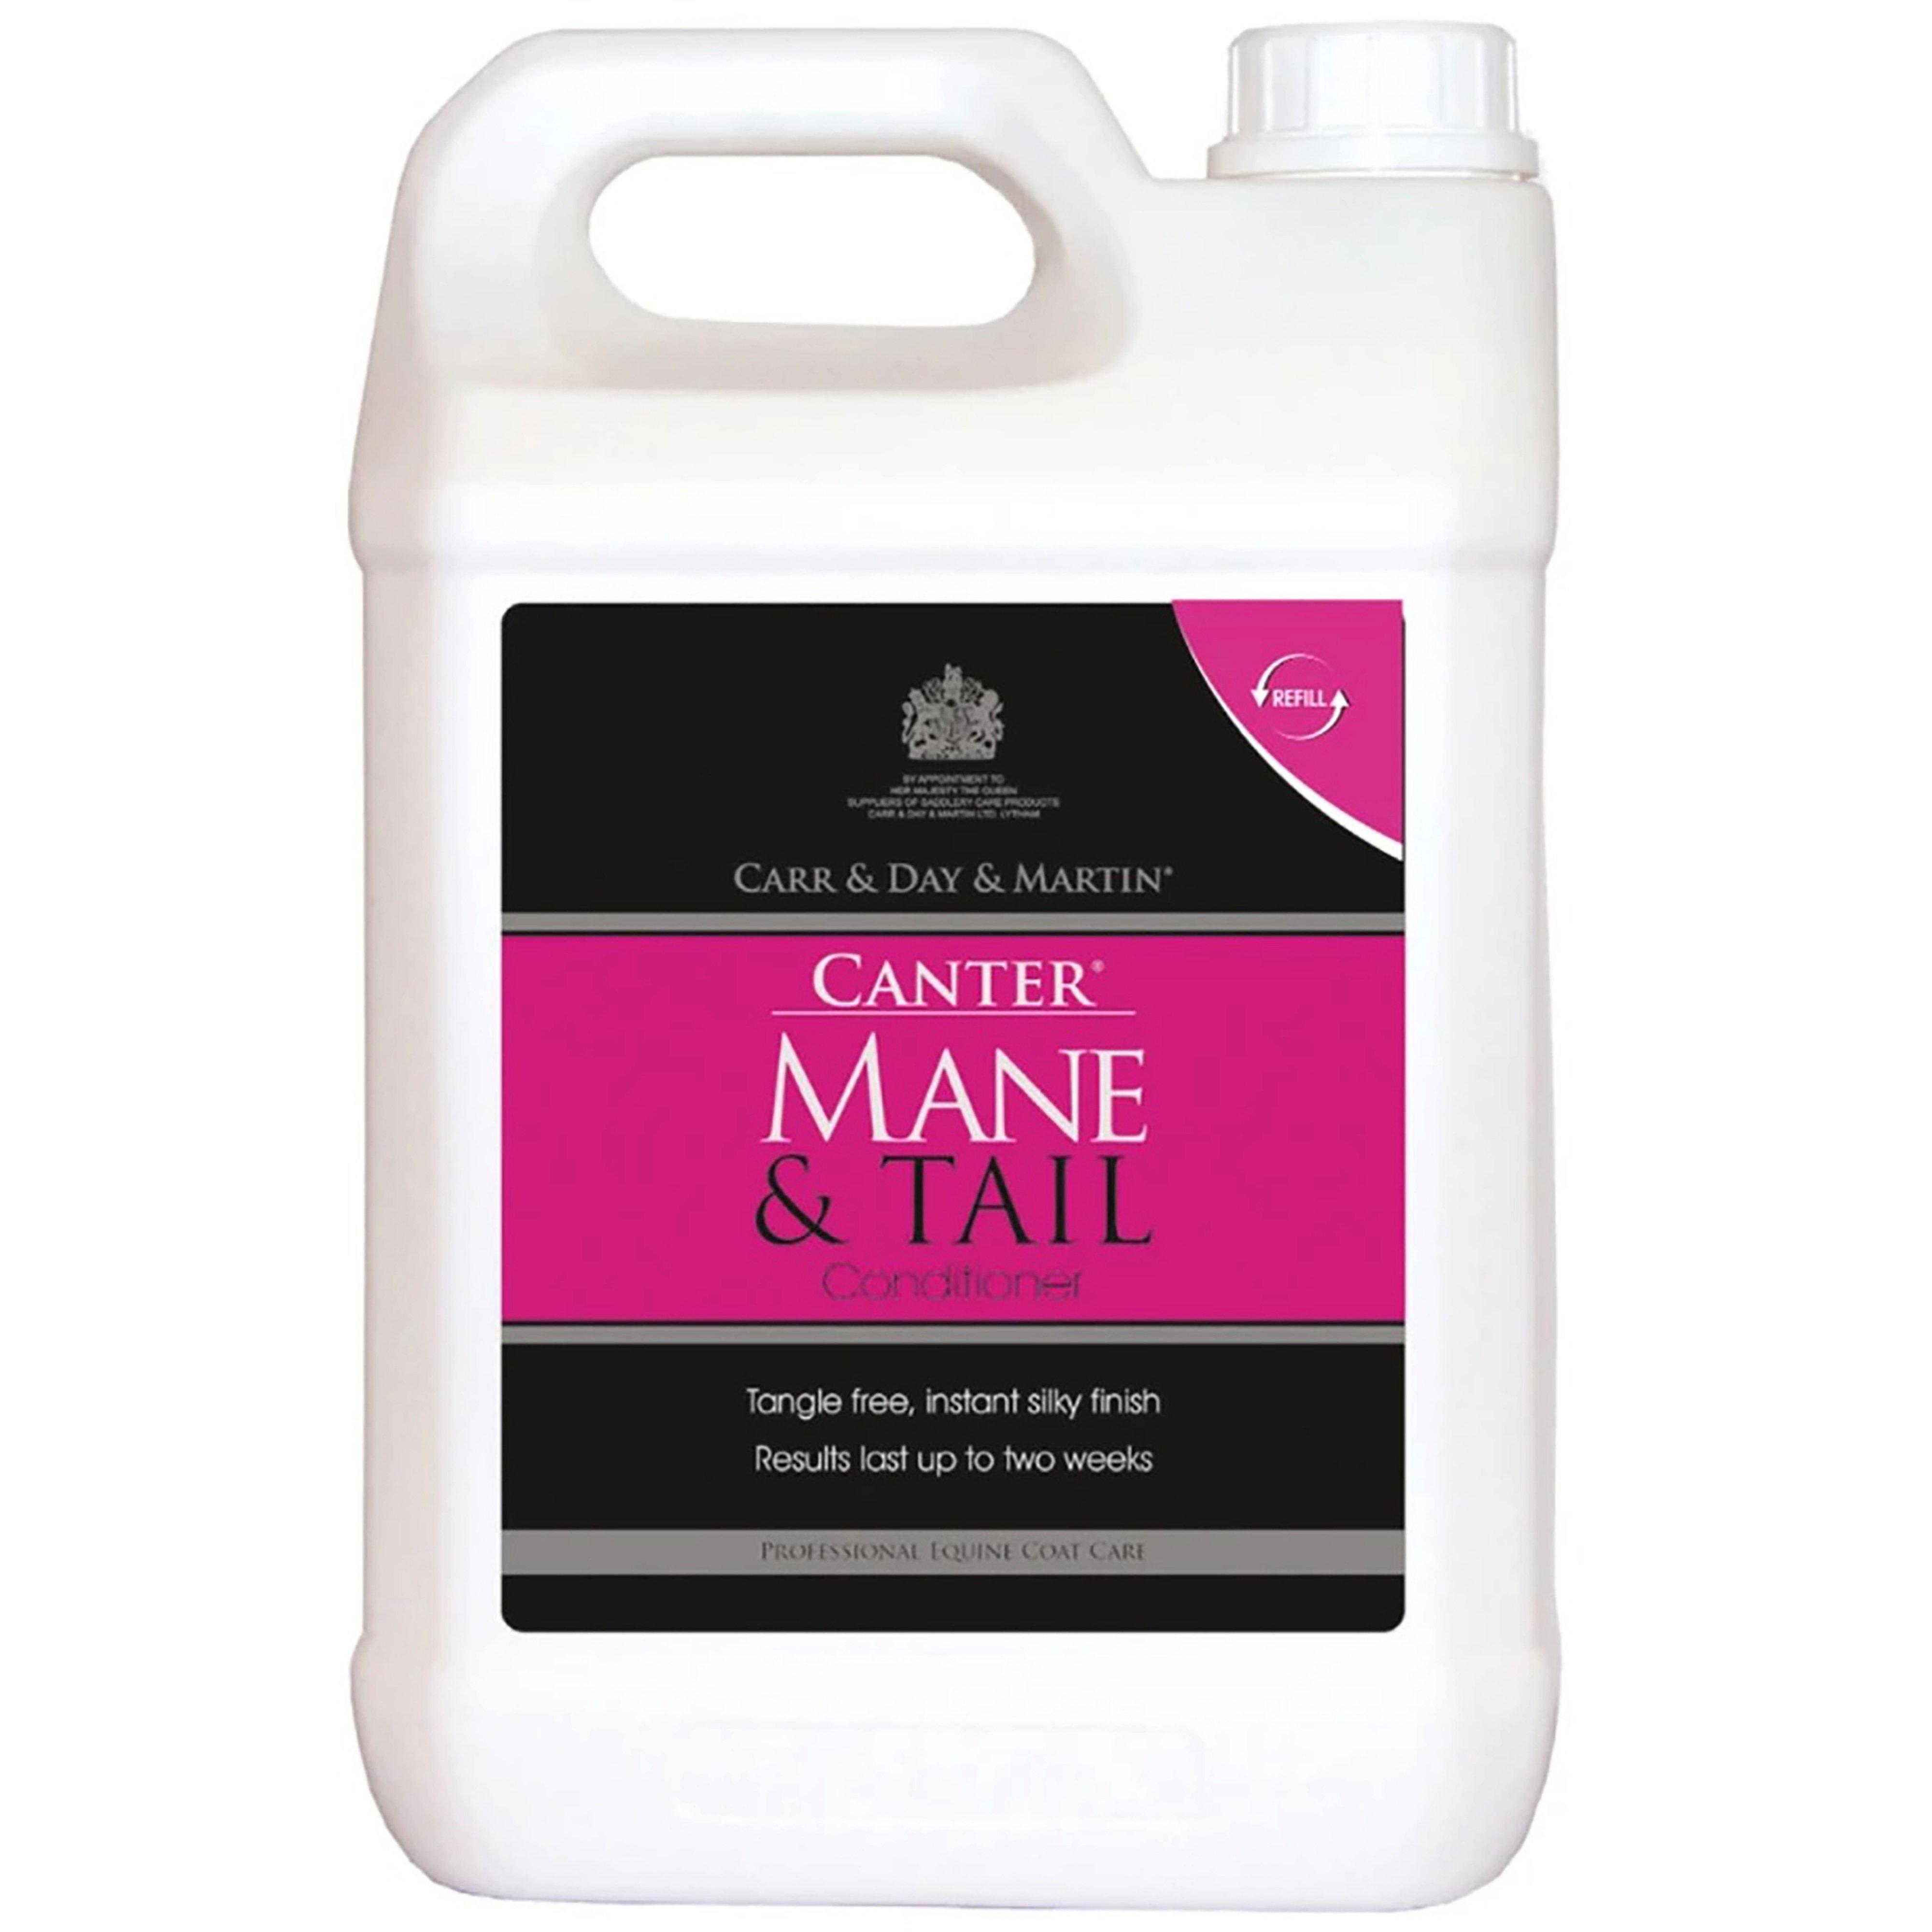 Canter Mane & Tail Conditioner Refill 2.5L